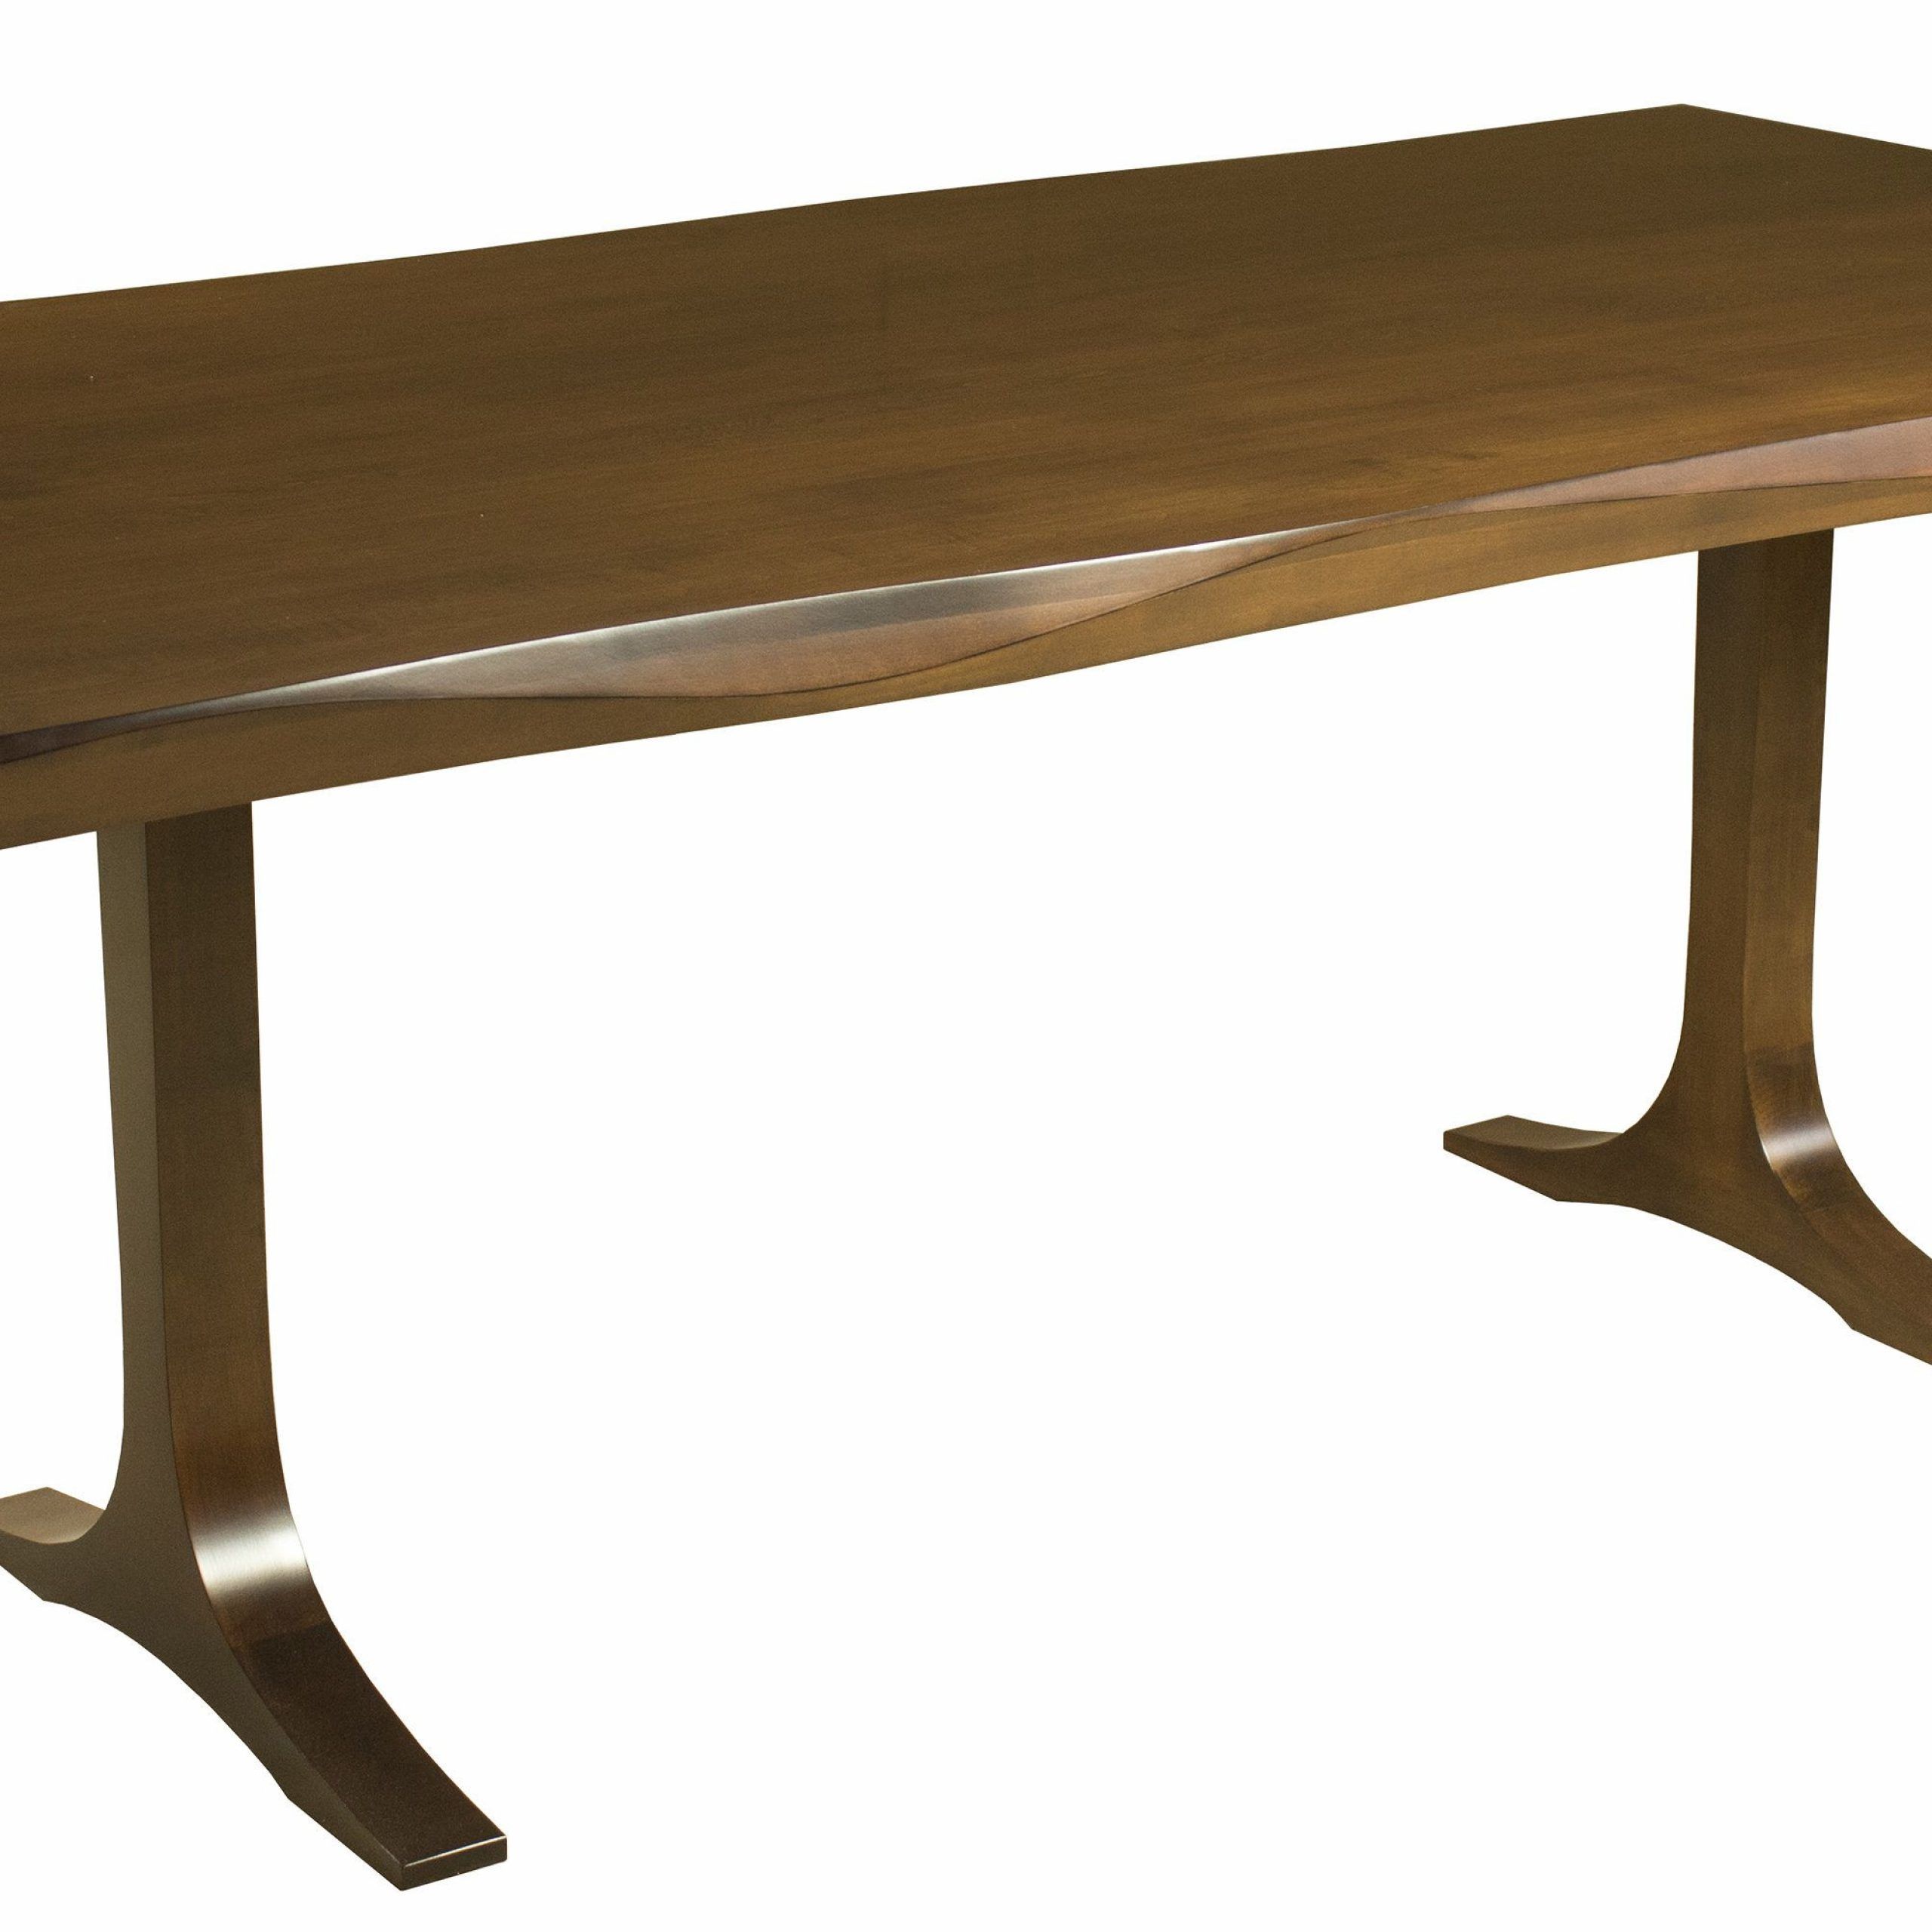 Well Known Bacher Maple Sculptured Edge Solid Wood Dining Table Regarding Drake Maple Solid Wood Dining Tables (View 8 of 20)